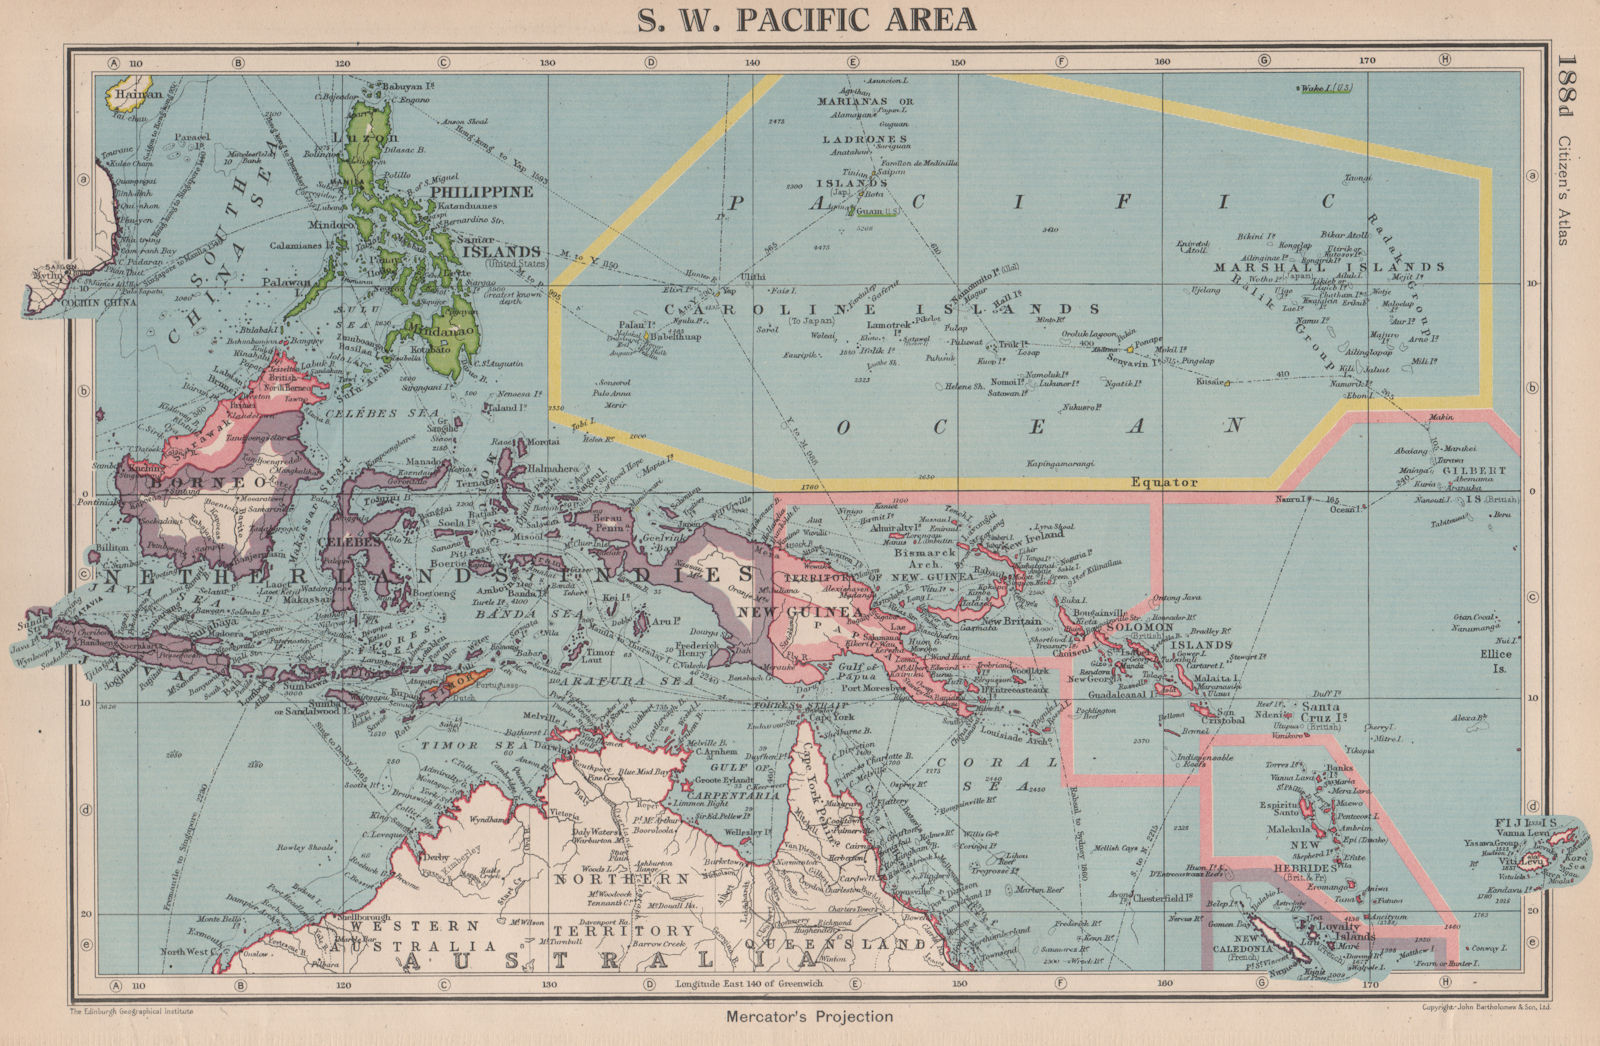 SOUTH-WEST PACIFIC shows Japanese-occupied Micronesia. Caroline Islands 1944 map